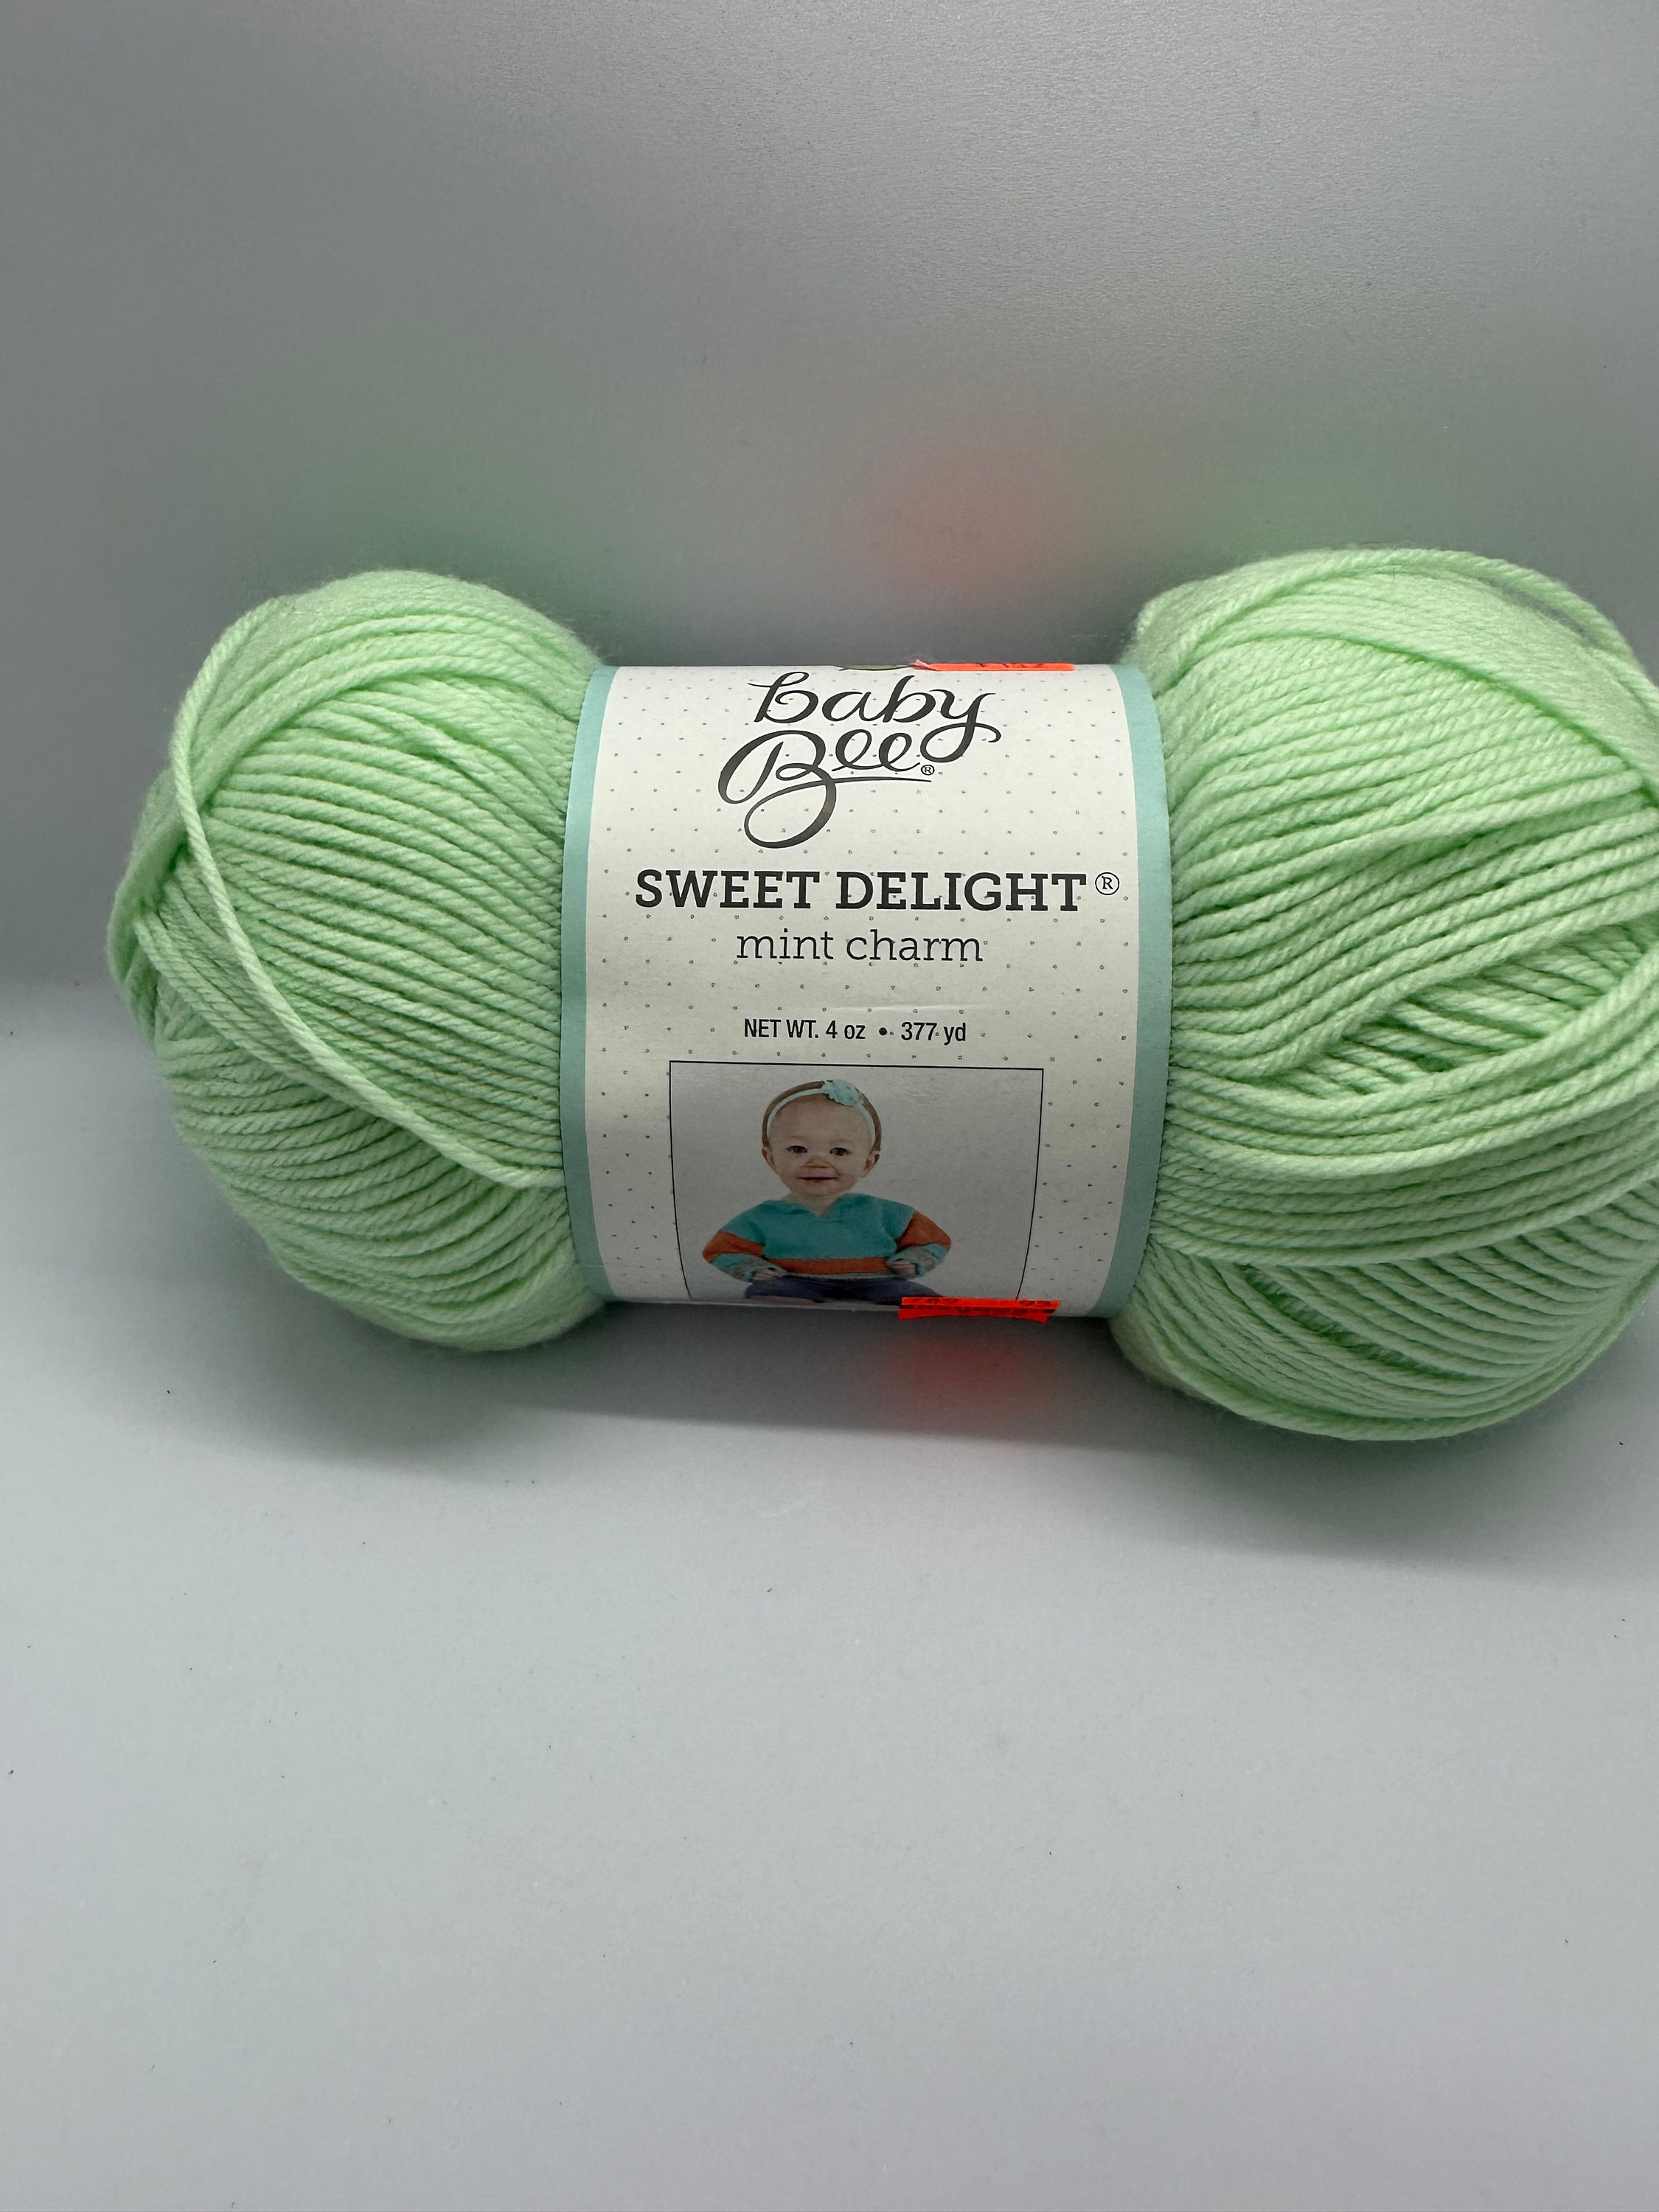 About Baby Bee – Lazy Bee Yarn